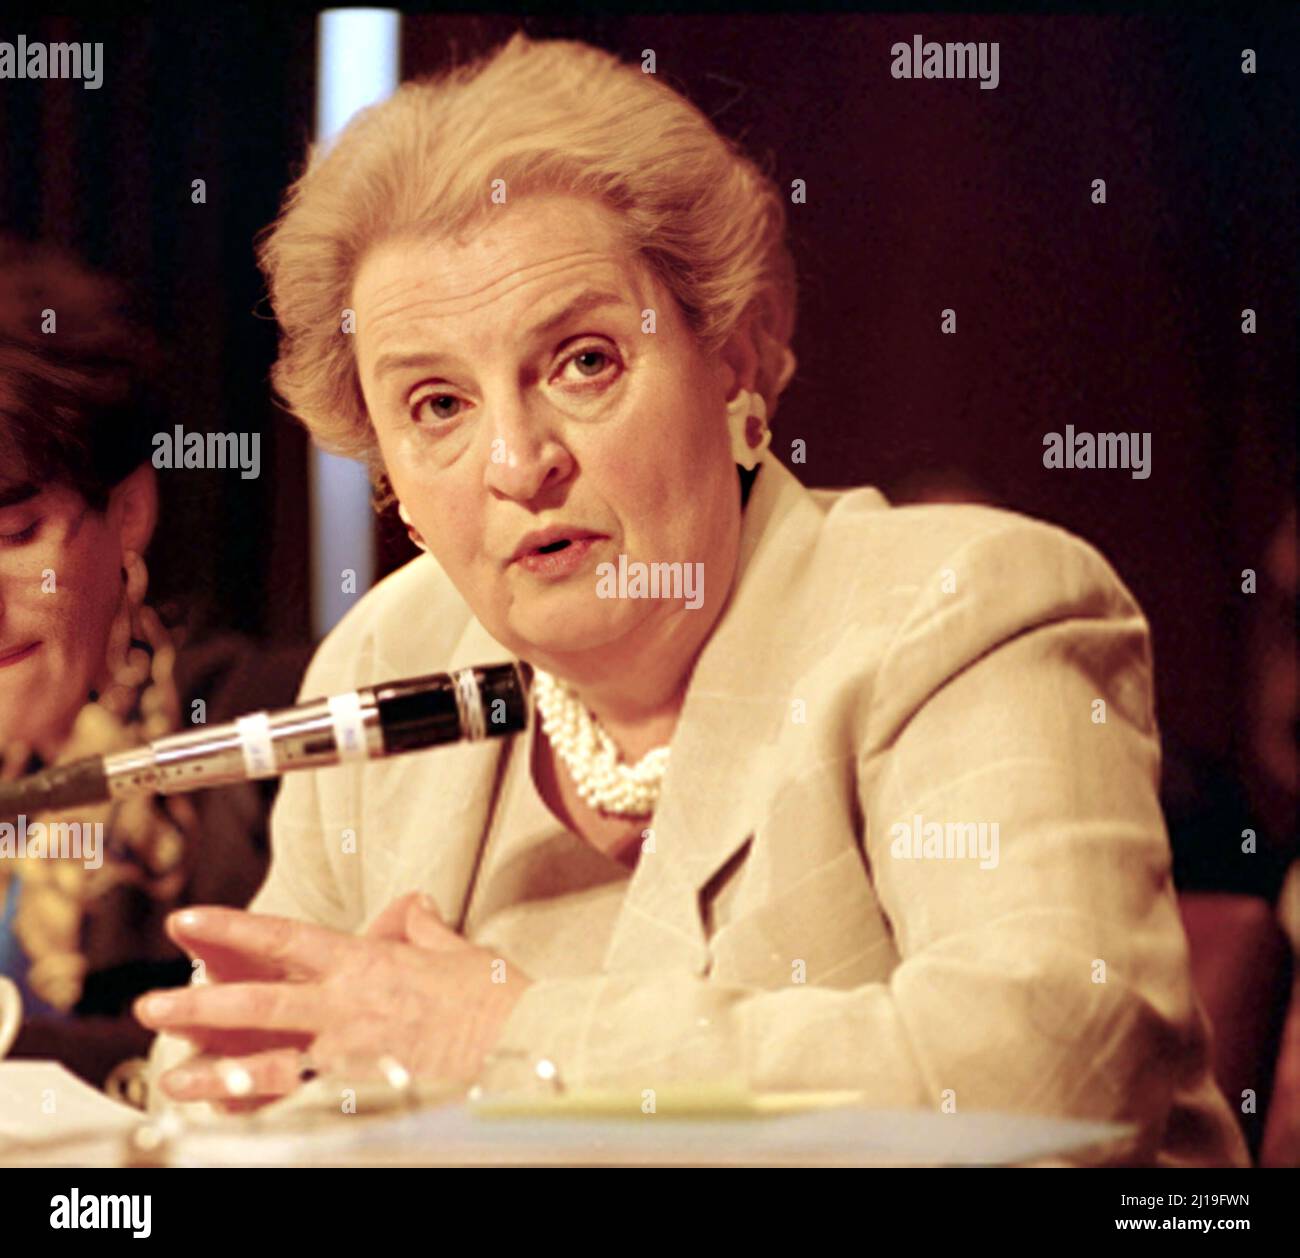 1997 , 10 june , Washington , USA : The american politician MADELEINE Korbel ALBRIGHT ( Marie Jana Korbelova , 1937 - 2022 ), was an American diplomat who served as the 64th United States Secretary of State from 1997 to 2001 under President Bill Clinton . She was the first female secretary of state in U.S. history.  In this photo Madeleine Albright testifies before the Senate Finance Committee on China's Most-Favored-Nation status .  Photo by White House Official Staff photographer Scott J. Ferrell .-  Segratario di stato donna alla Presidenza degli Stati Uniti d'America -  STATI UNITI AMERICA Stock Photo